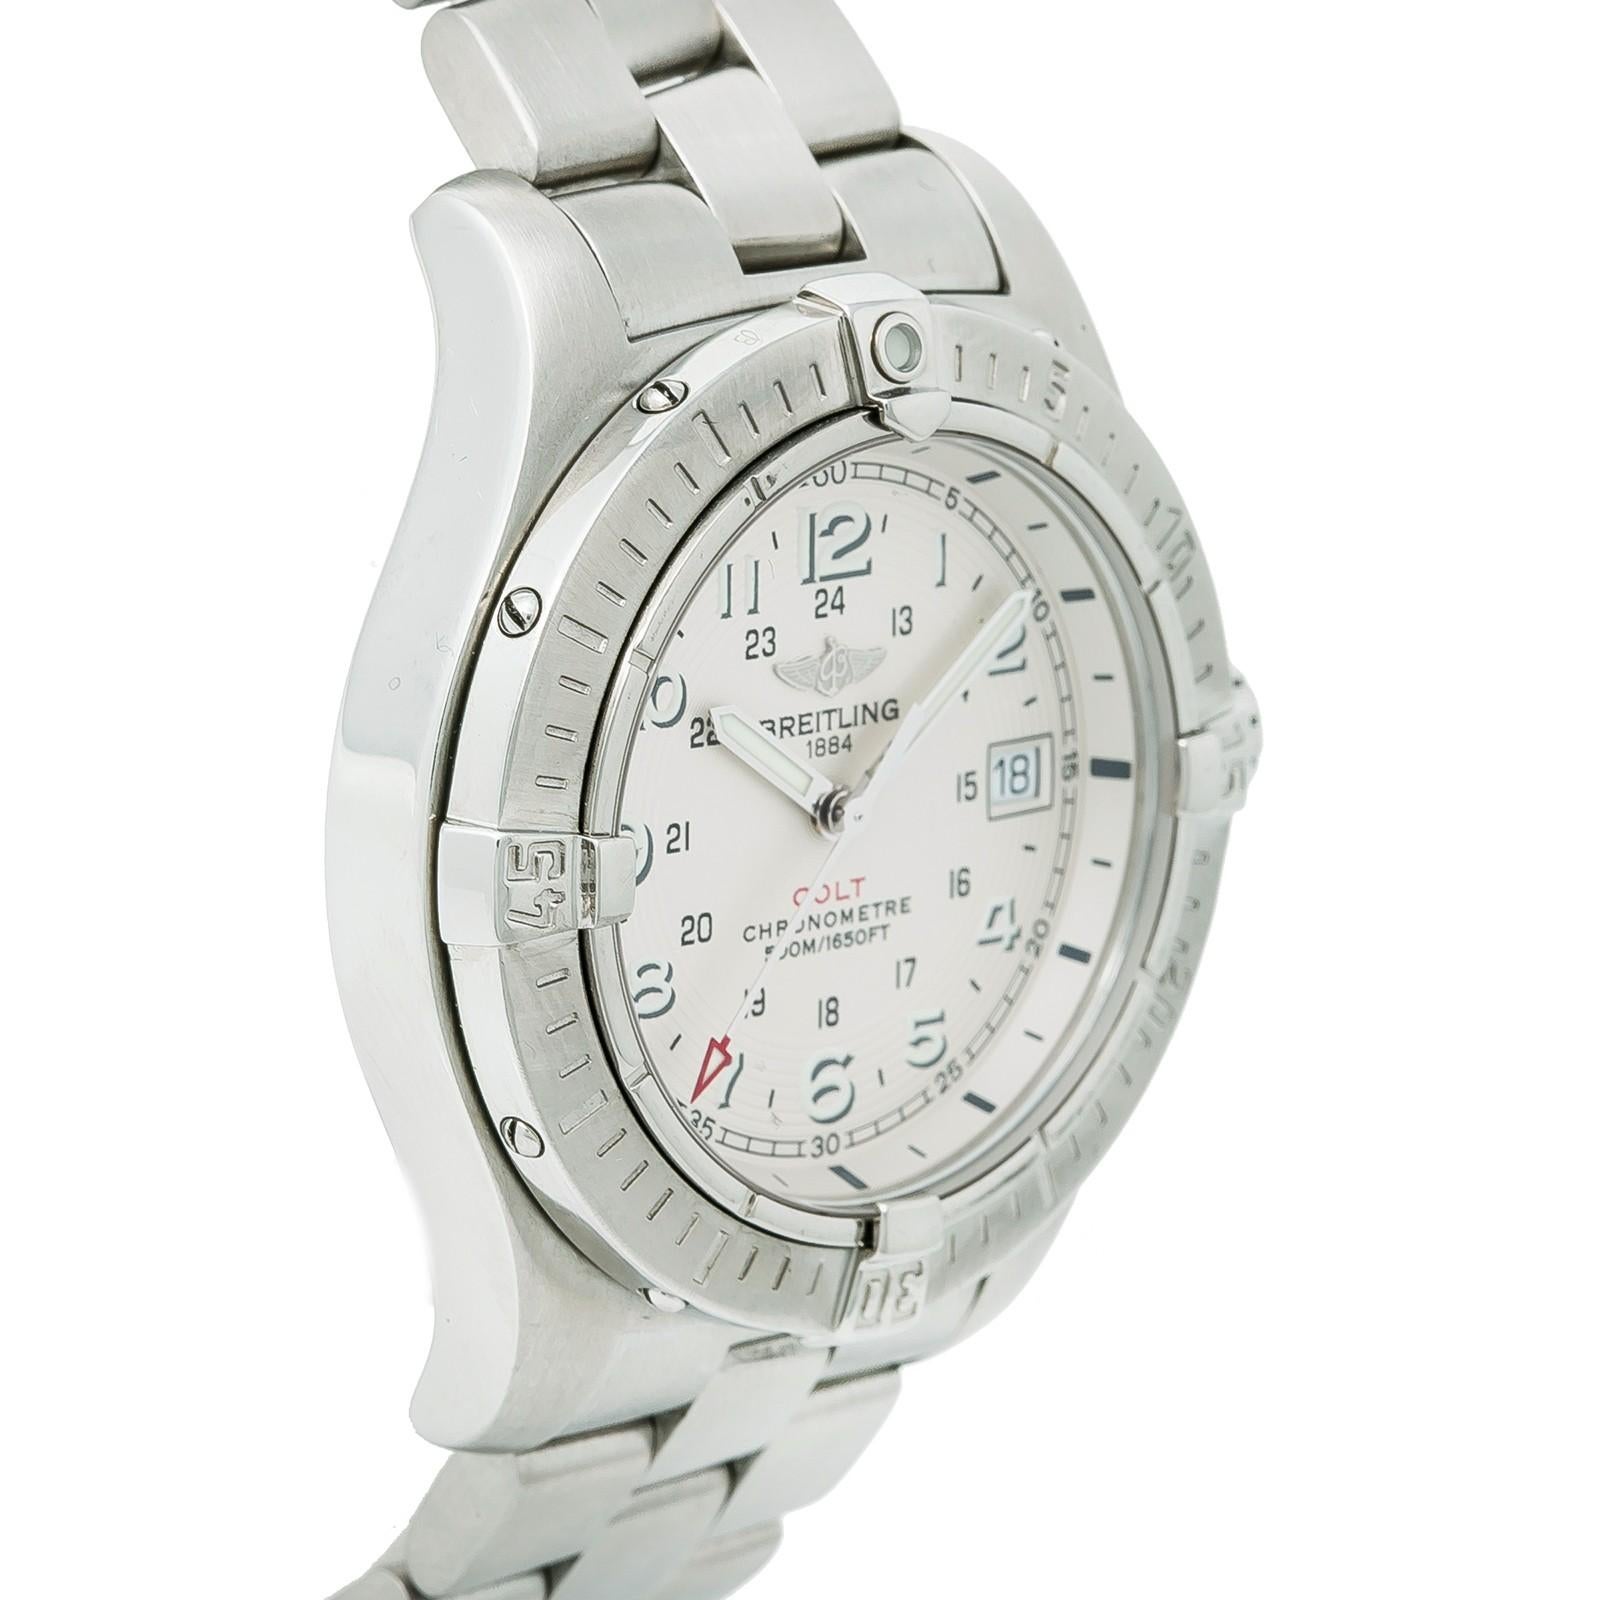 Certified Breitling Colt A74380 Men's Quartz Watch Cream Dial Stainless Steel 41 In Excellent Condition For Sale In Miami, FL